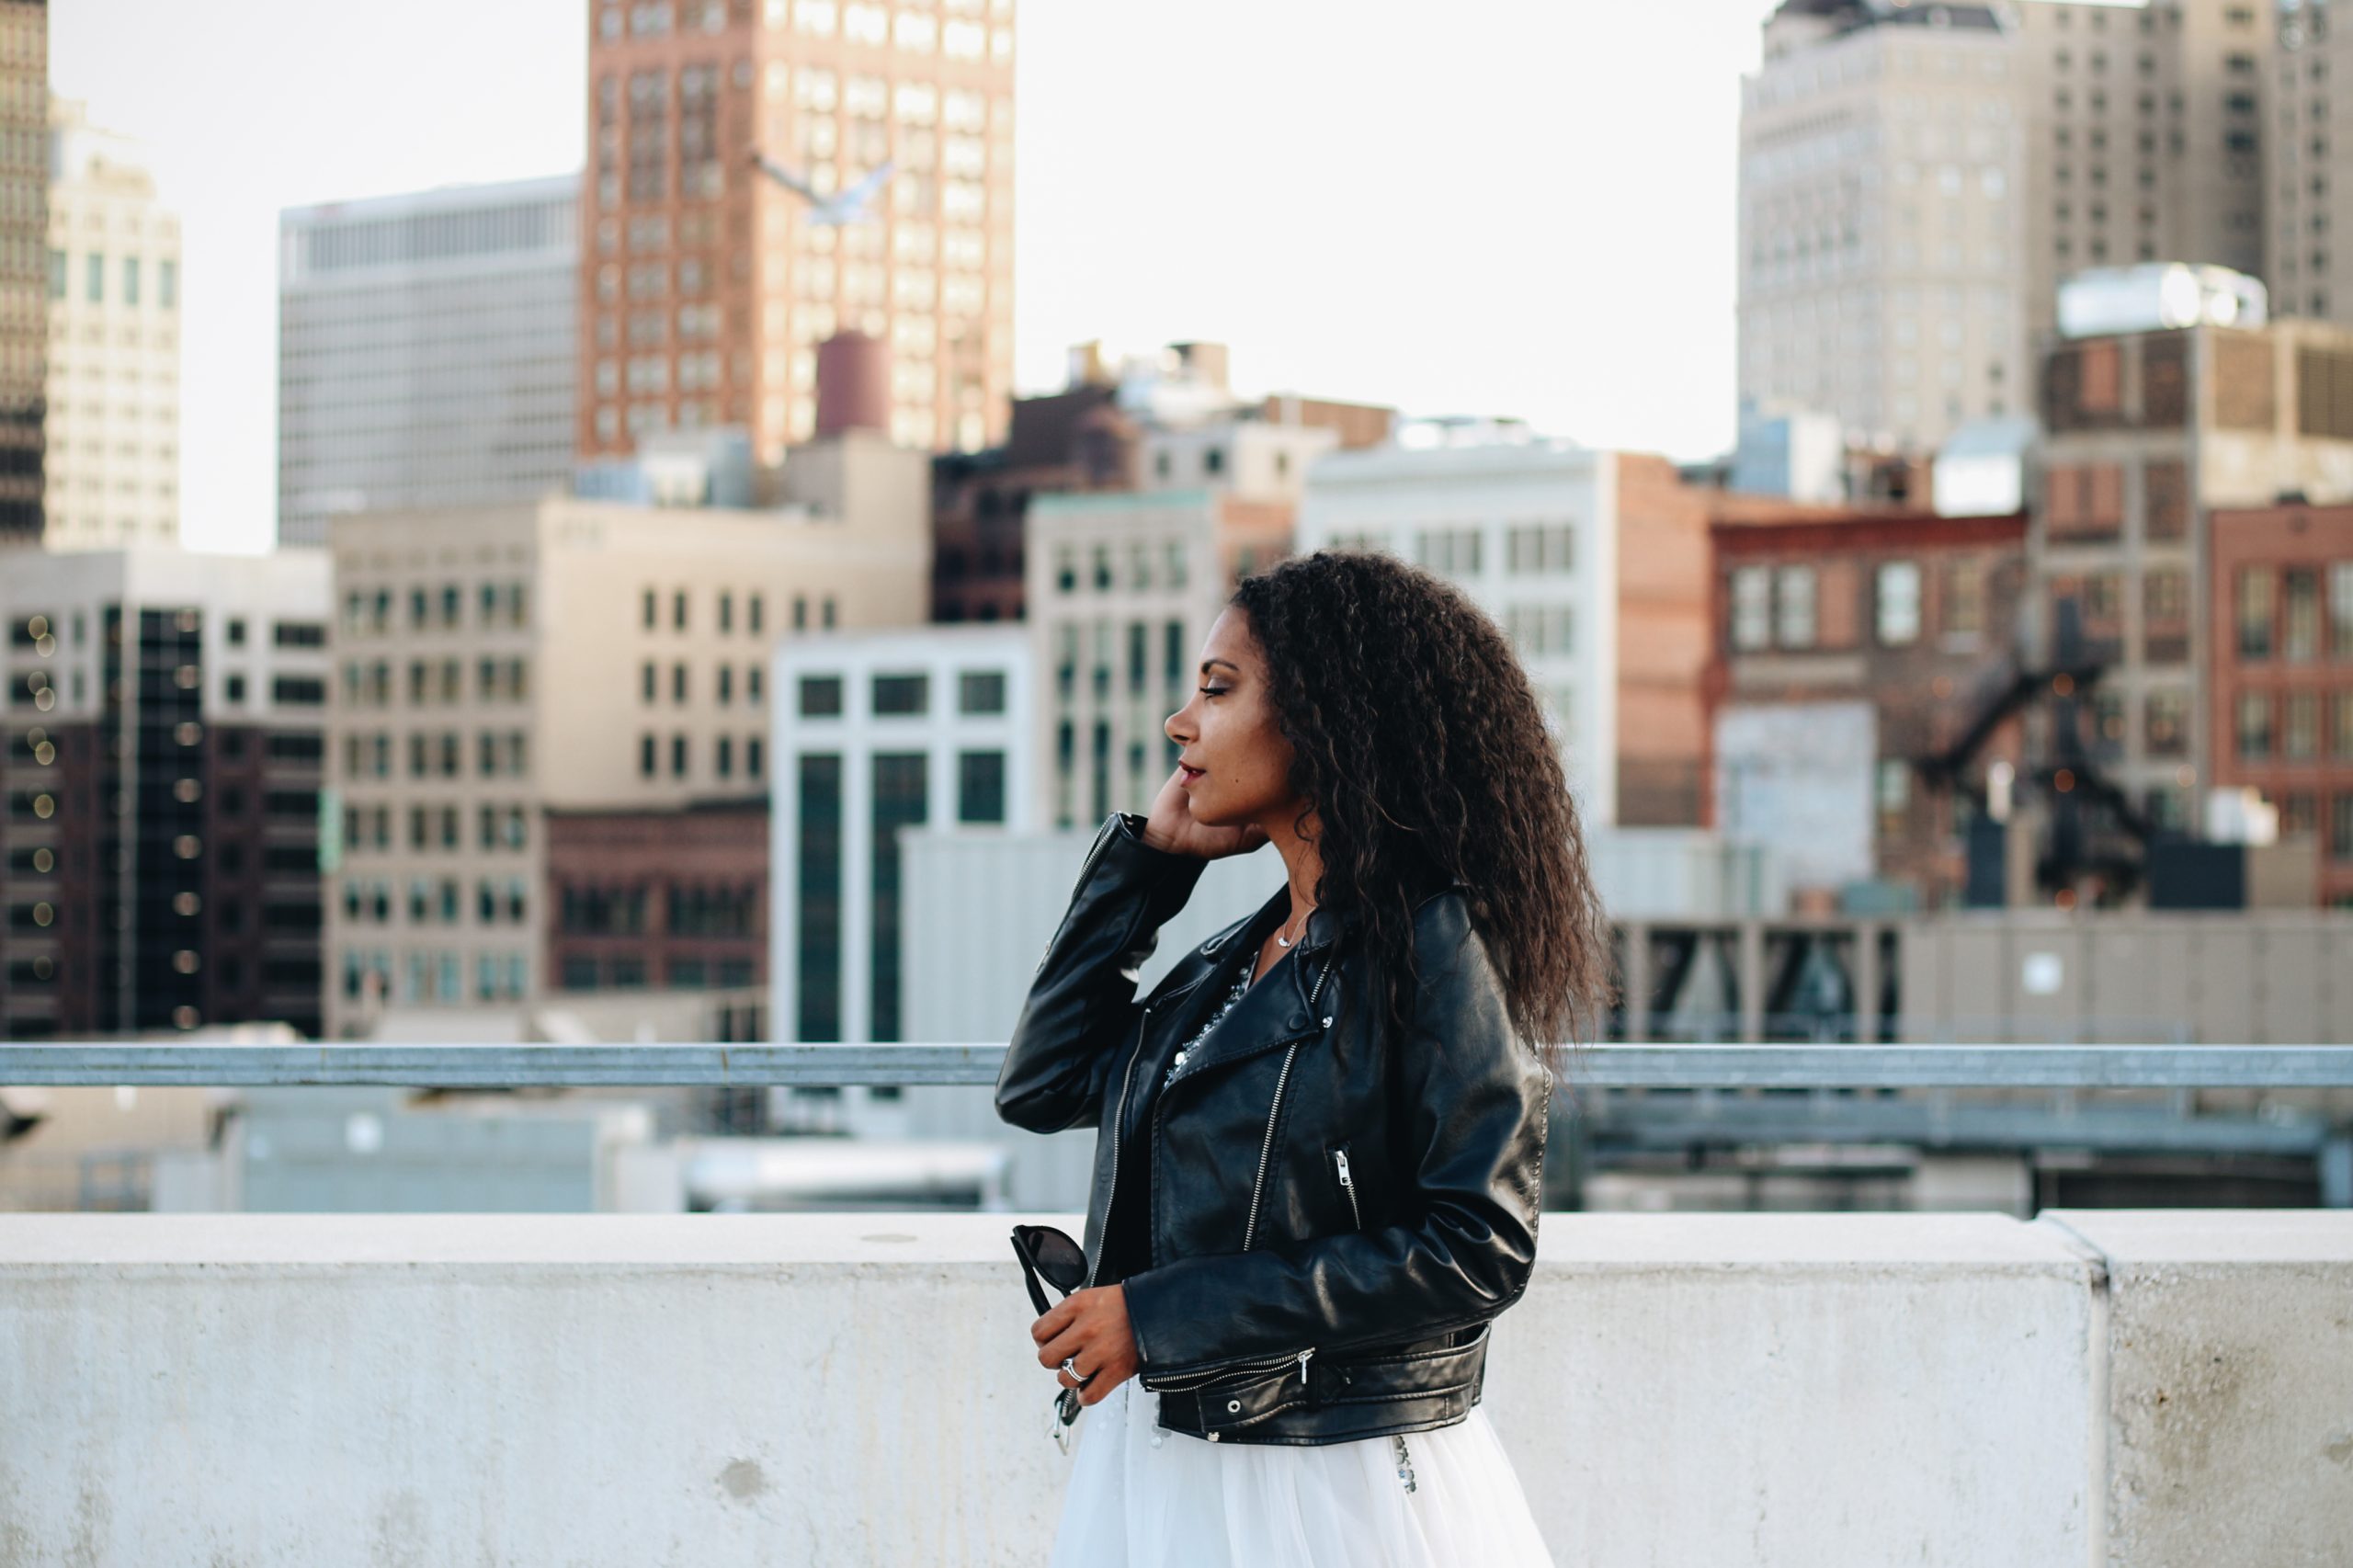 Detroit Bride with rocker style in the city via Chettara T. Photography on a parking garage roof.